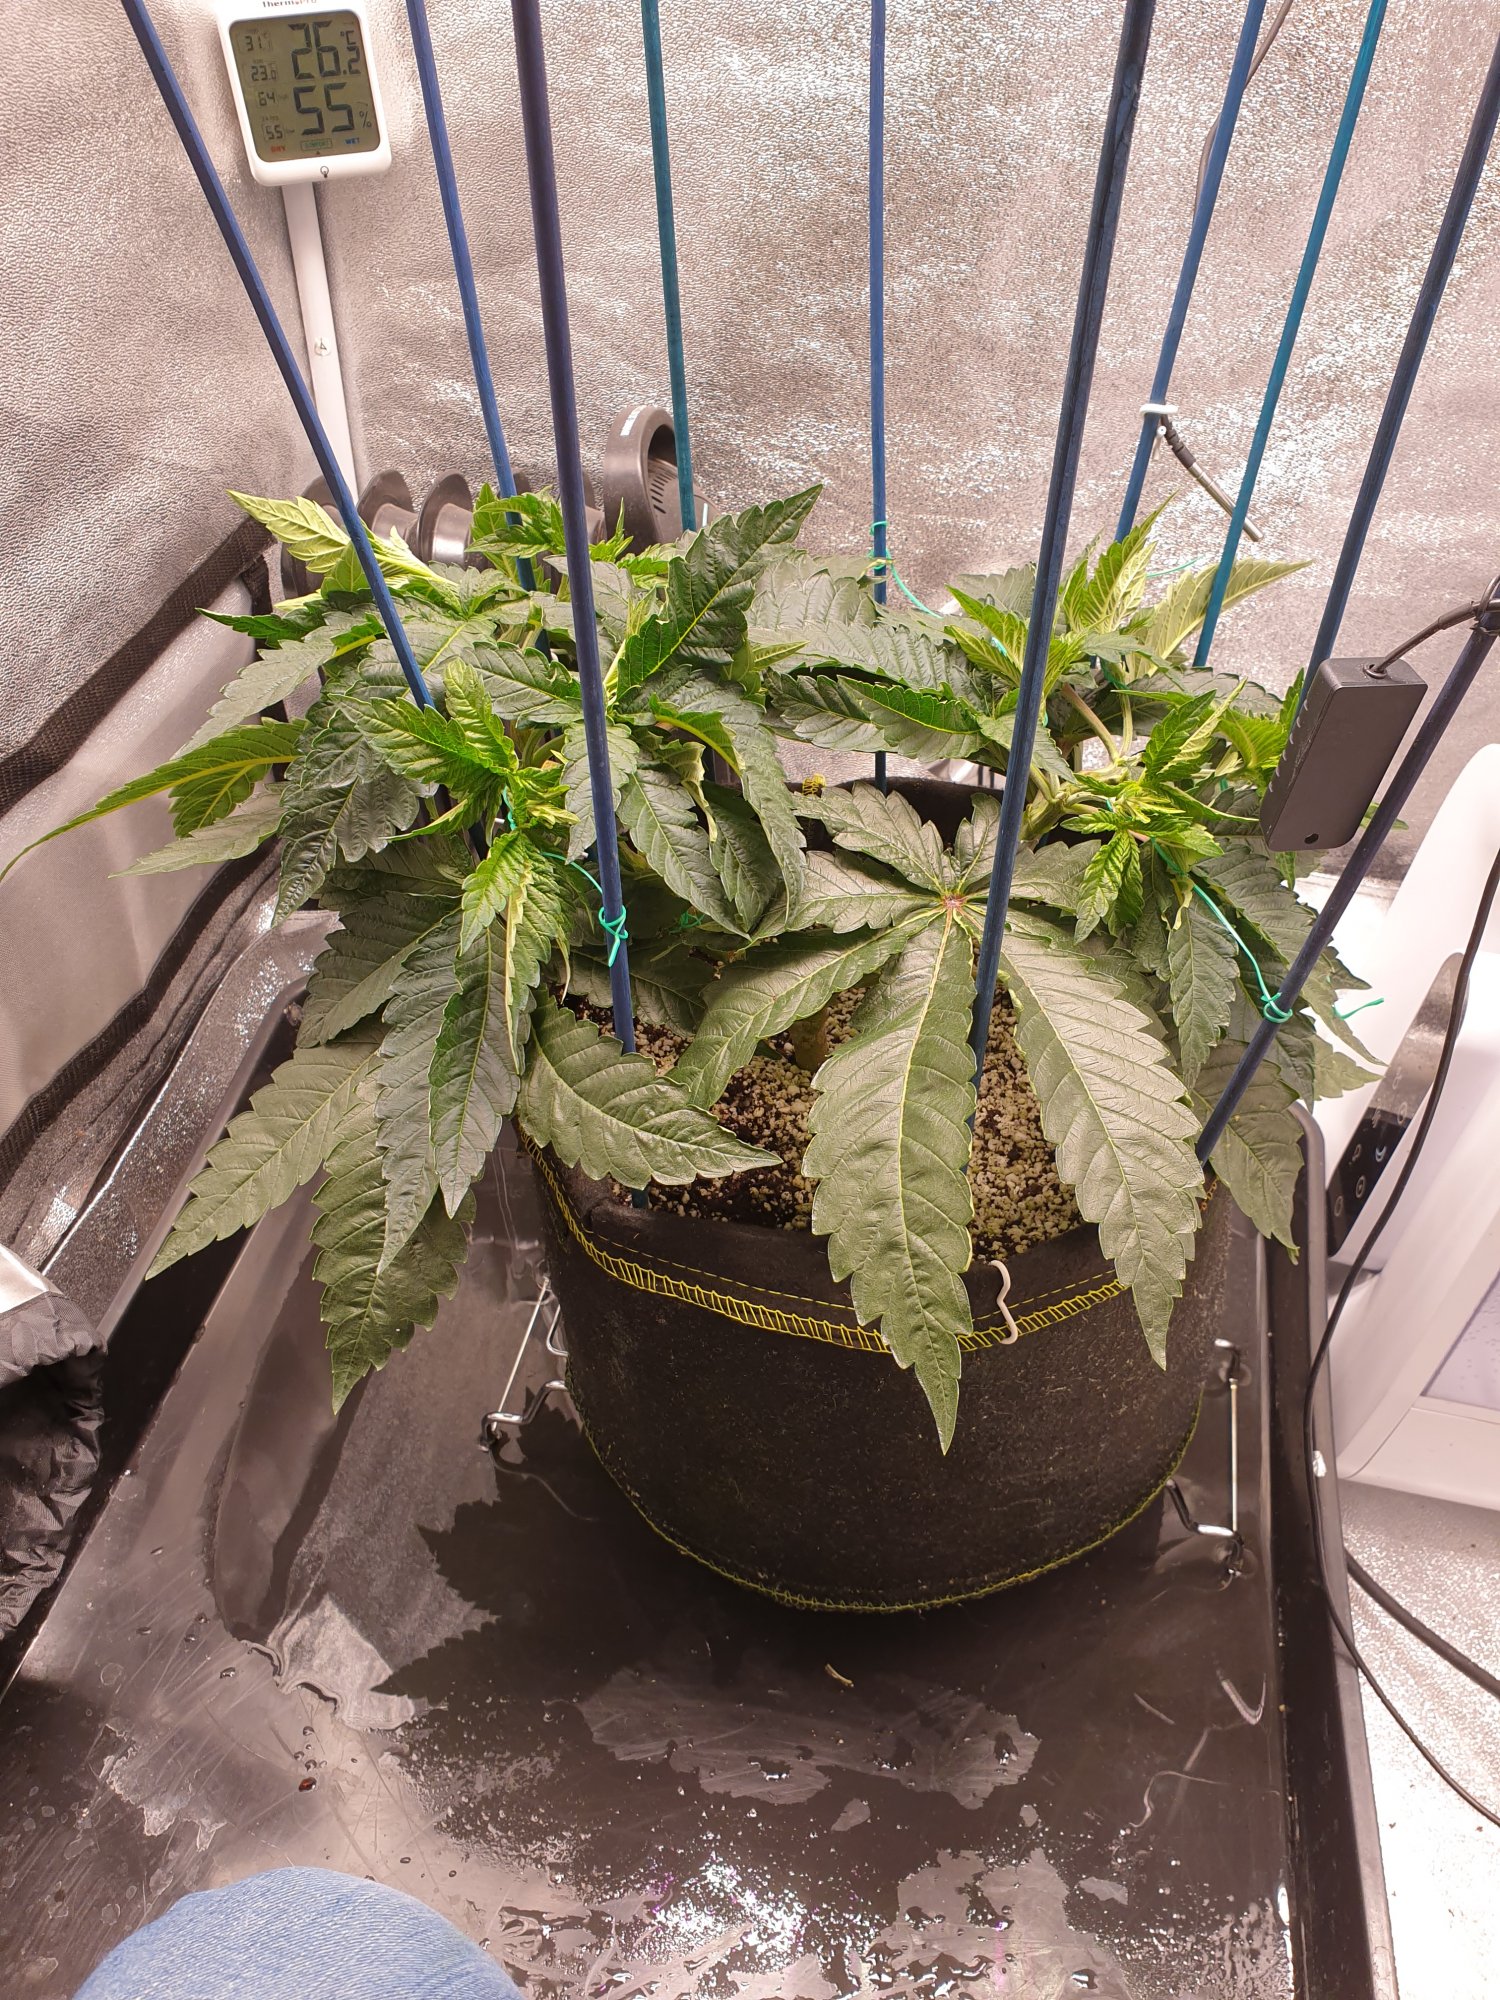 Help please new ish grower after some advice 4